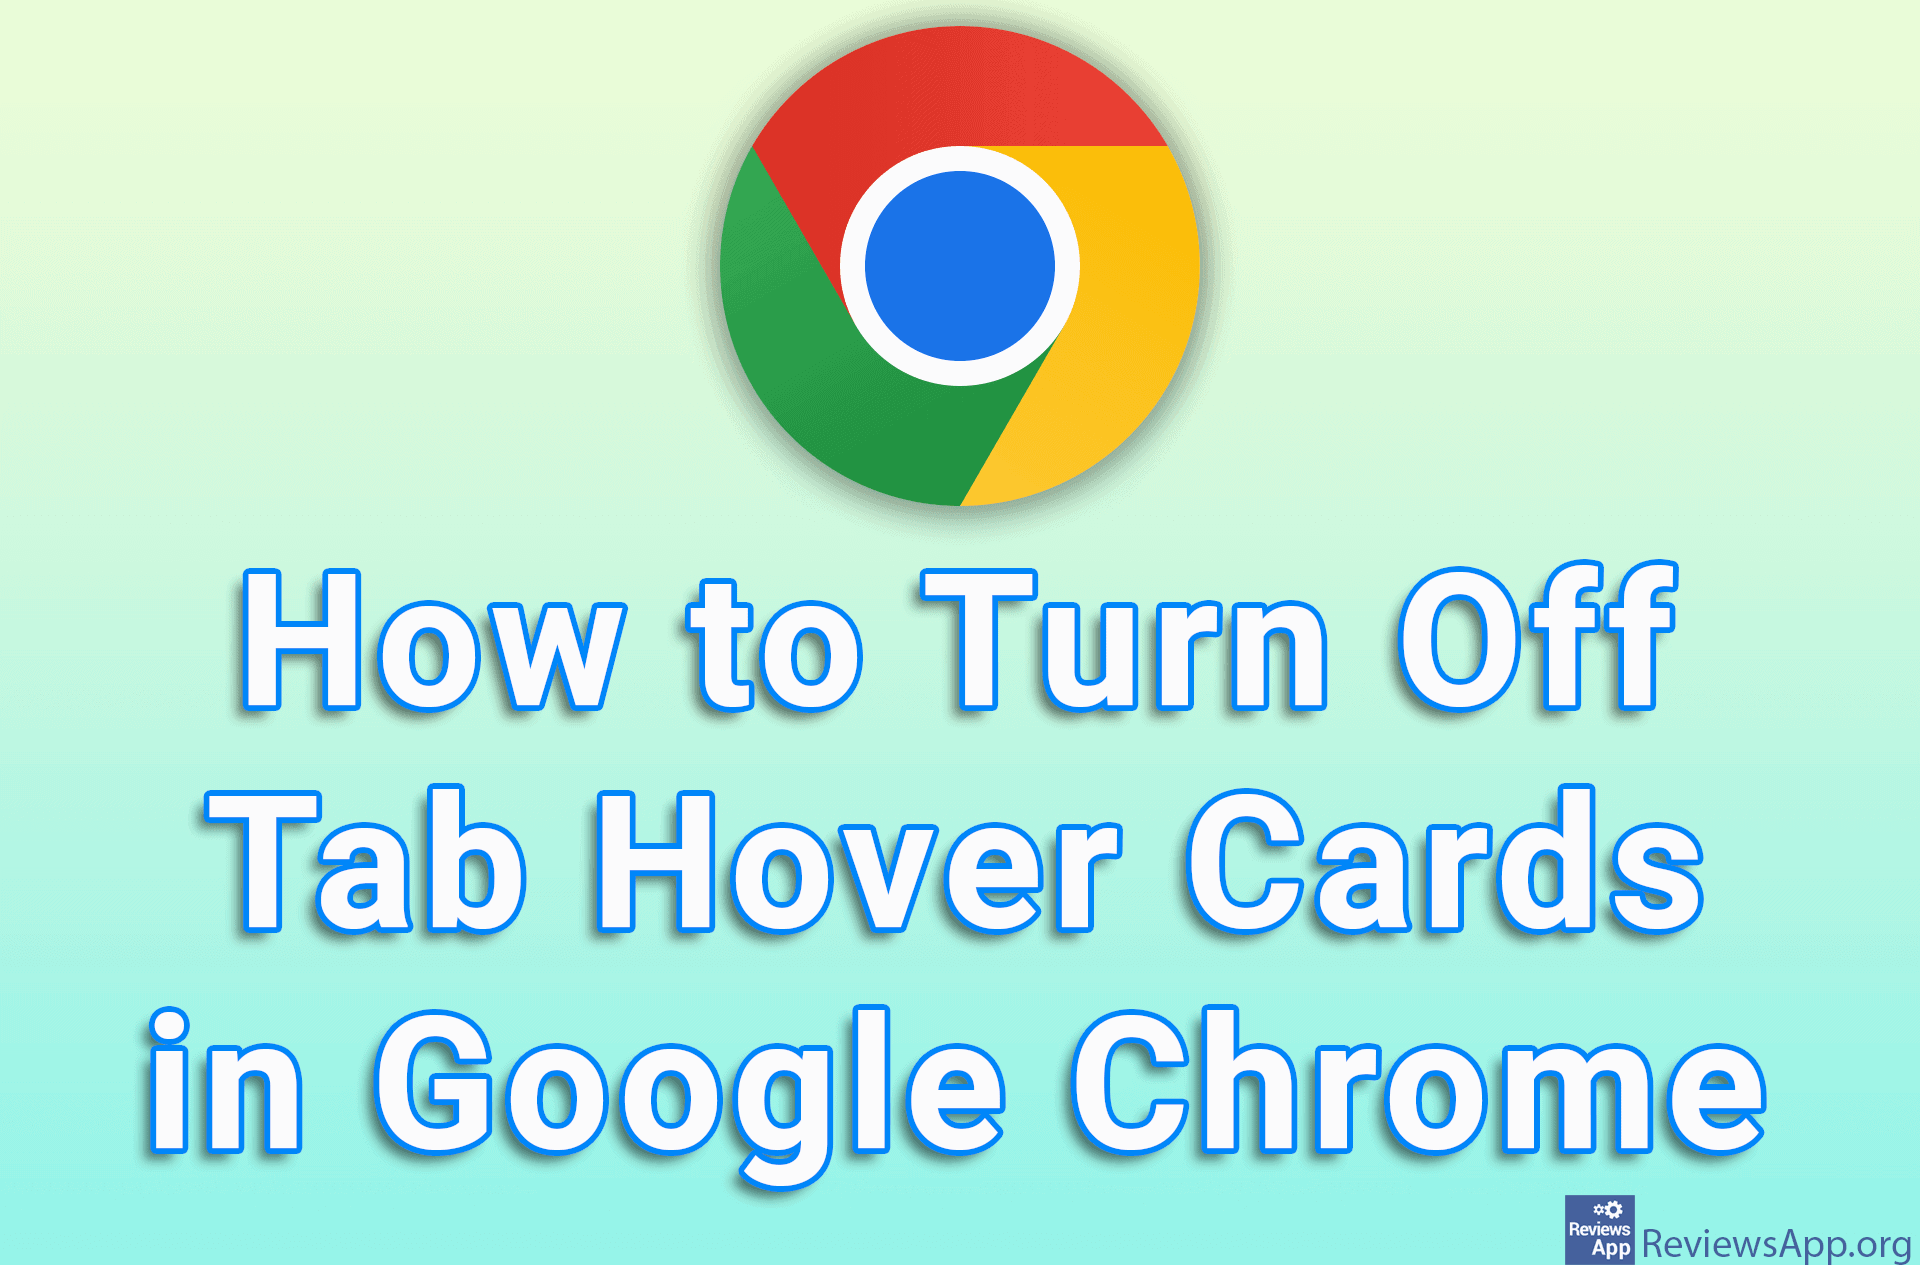 How to Turn Off Tab Hover Cards in Google Chrome